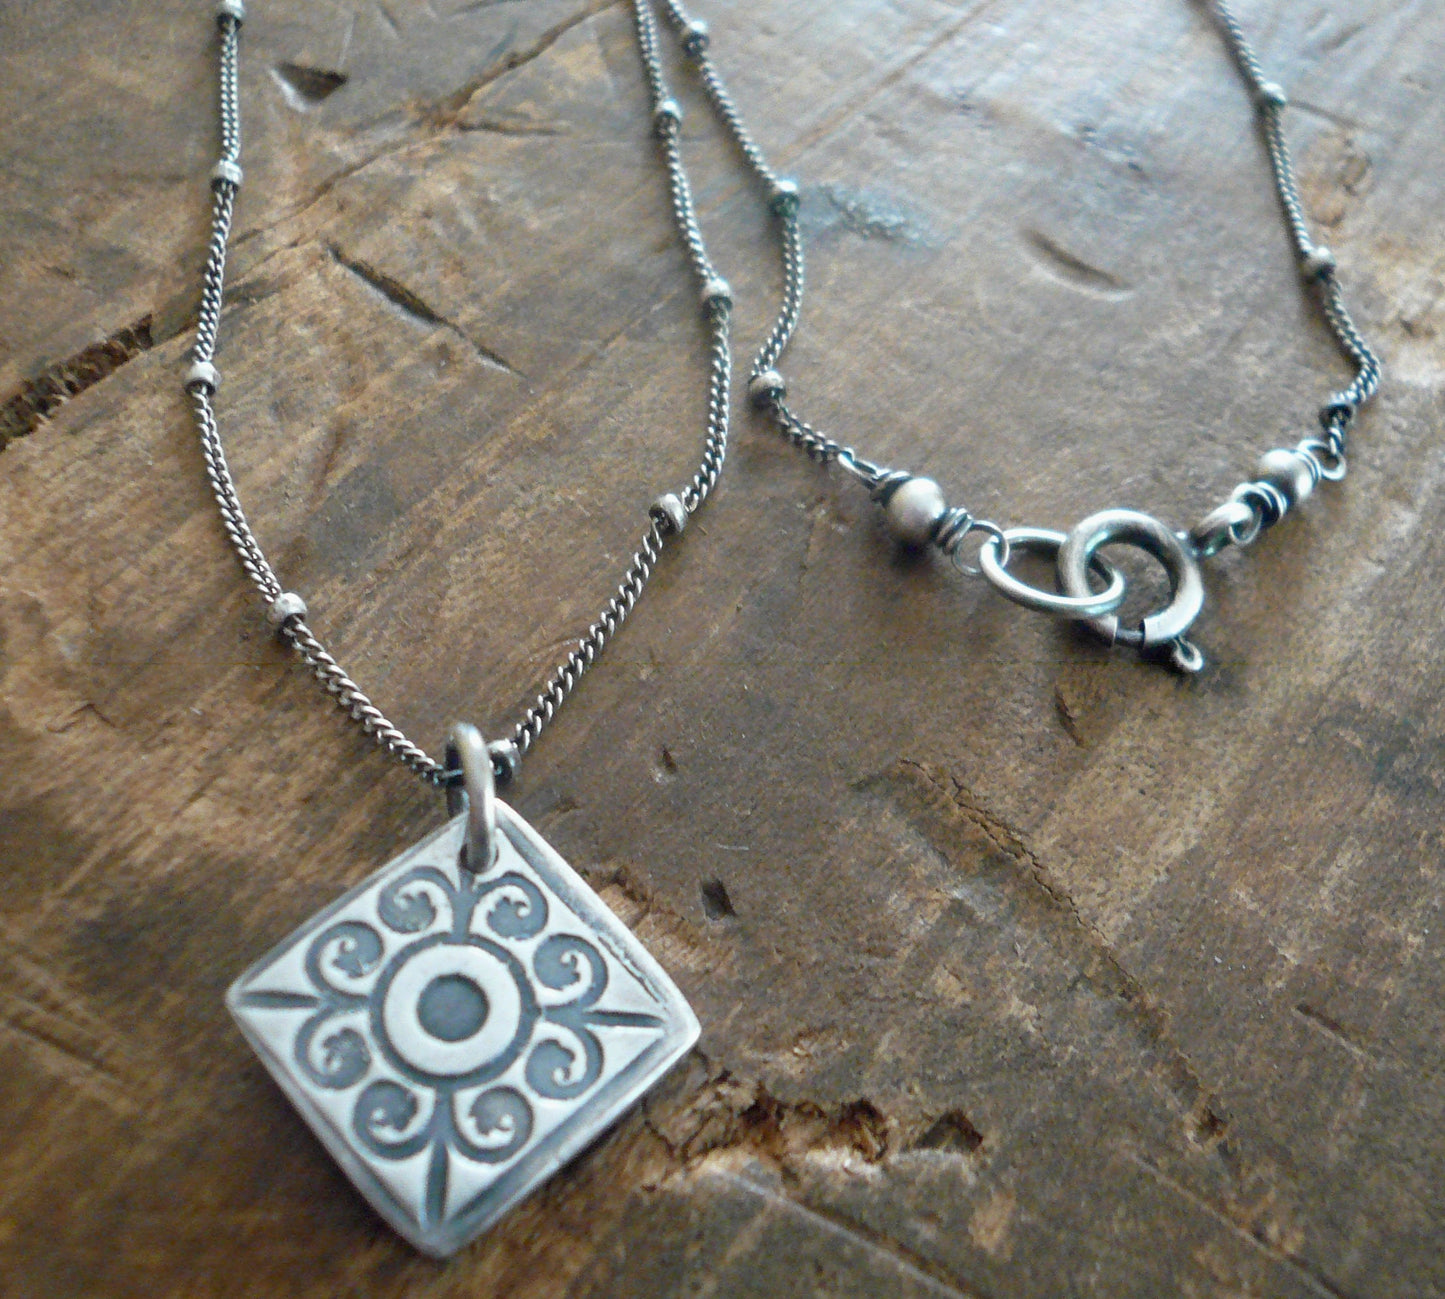 French Quarter Necklace -Diamond - Oxidized fine and Sterling Silver or 14kt Goldfill. Handmade